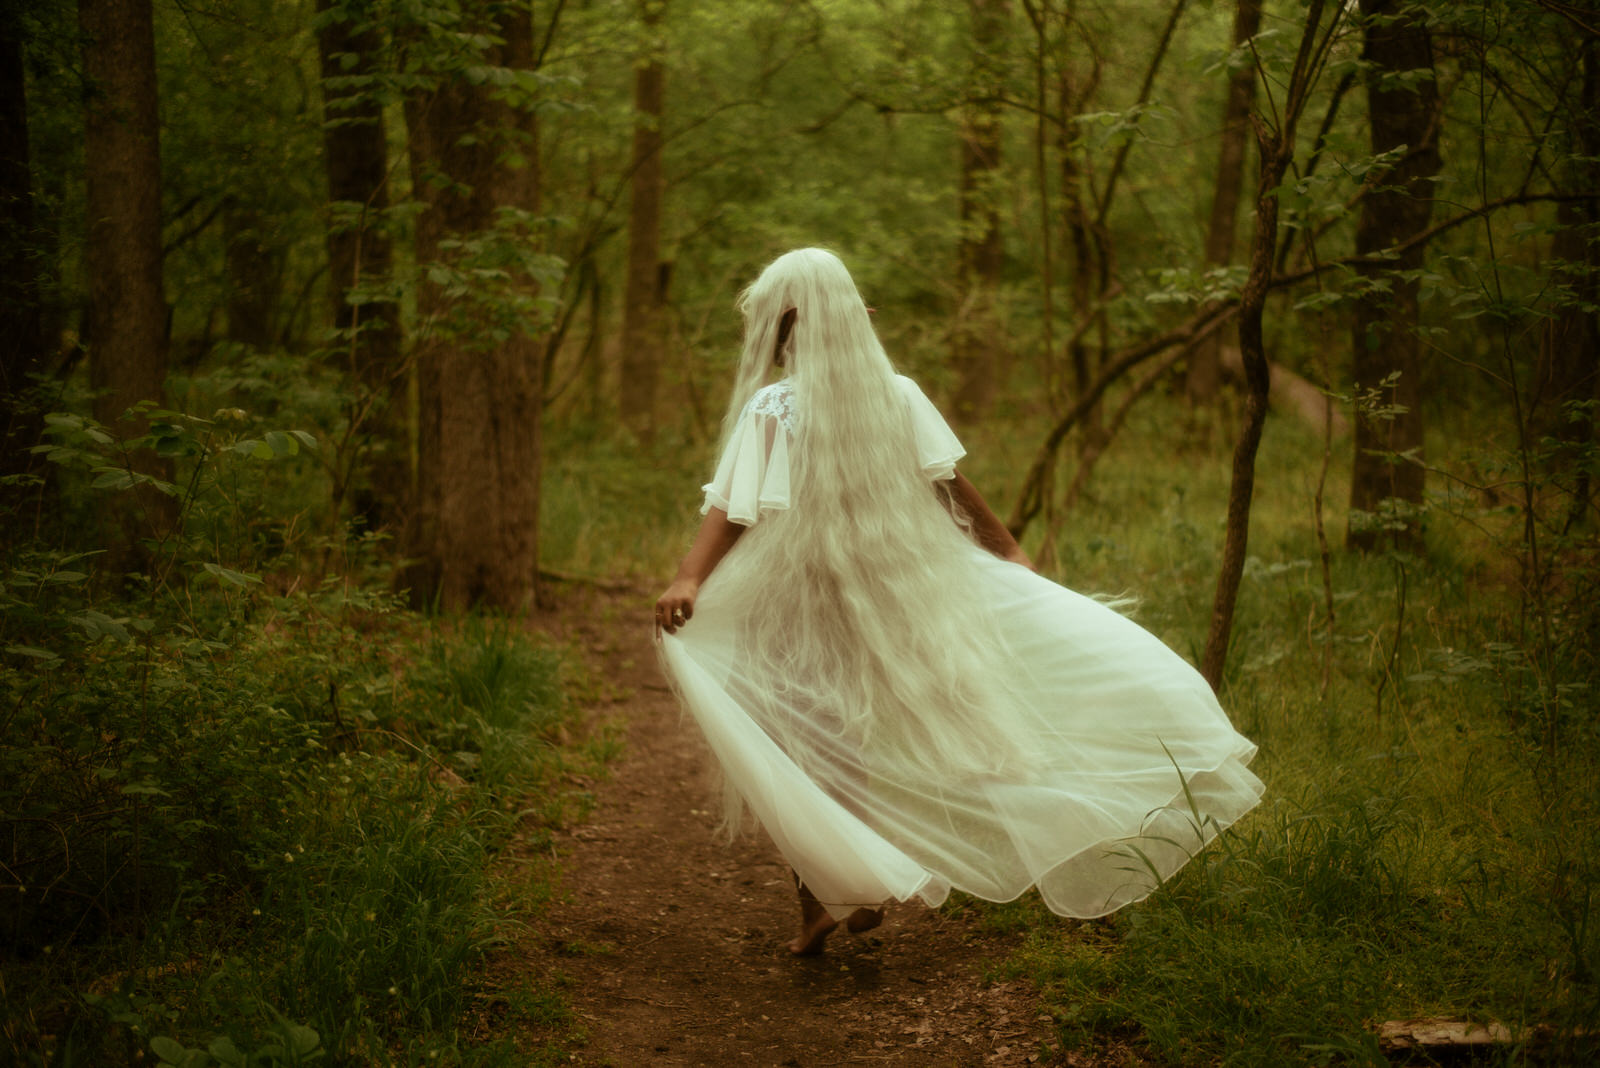 Elven woman with long white hair walking through the forest.